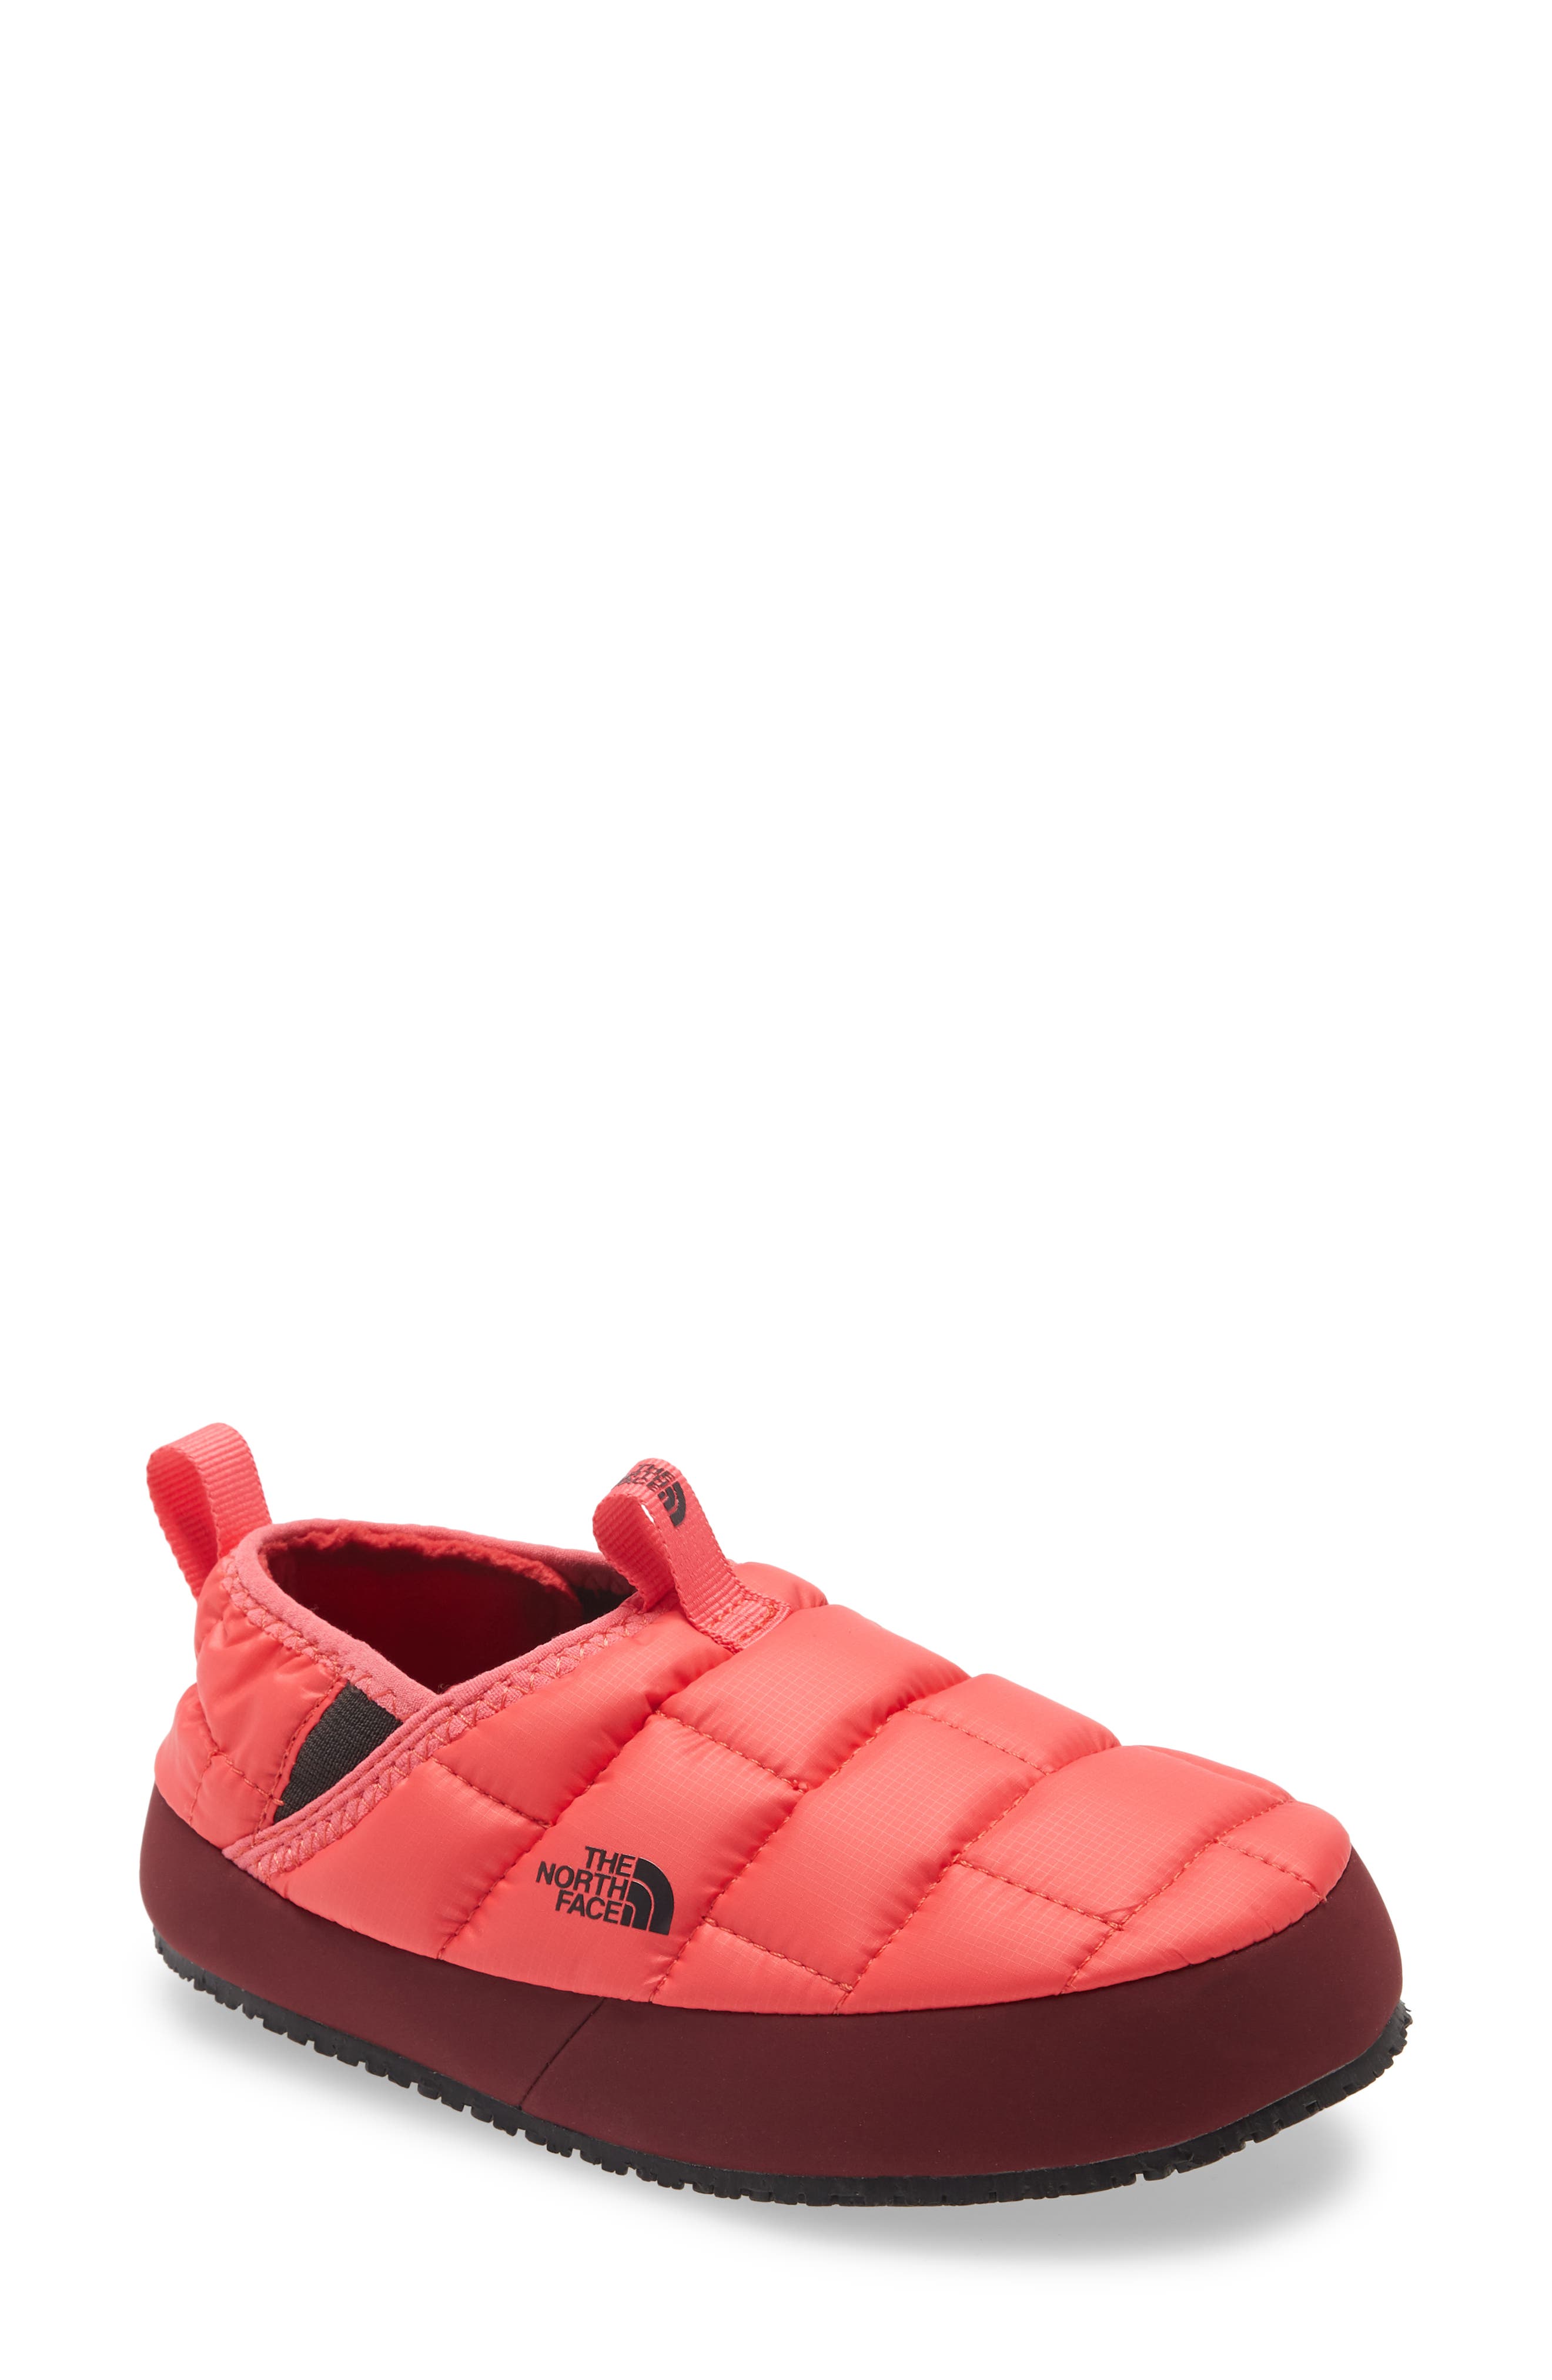 north face boys shoes